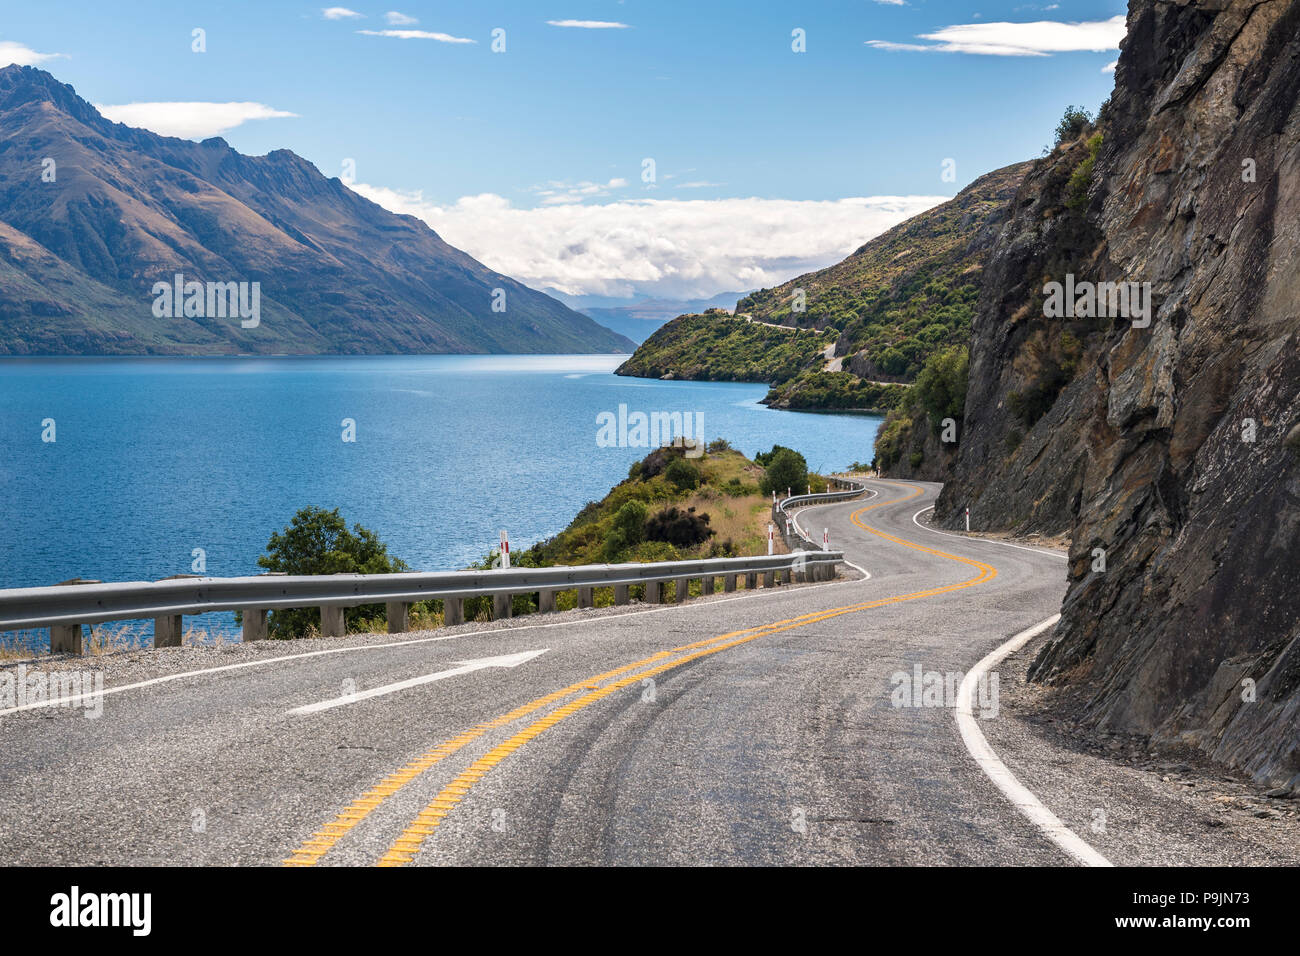 Curvy road to Queenstown on Lake Wakatipu, Devil's Staircase, Otago, South Island, New Zealand Stock Photo